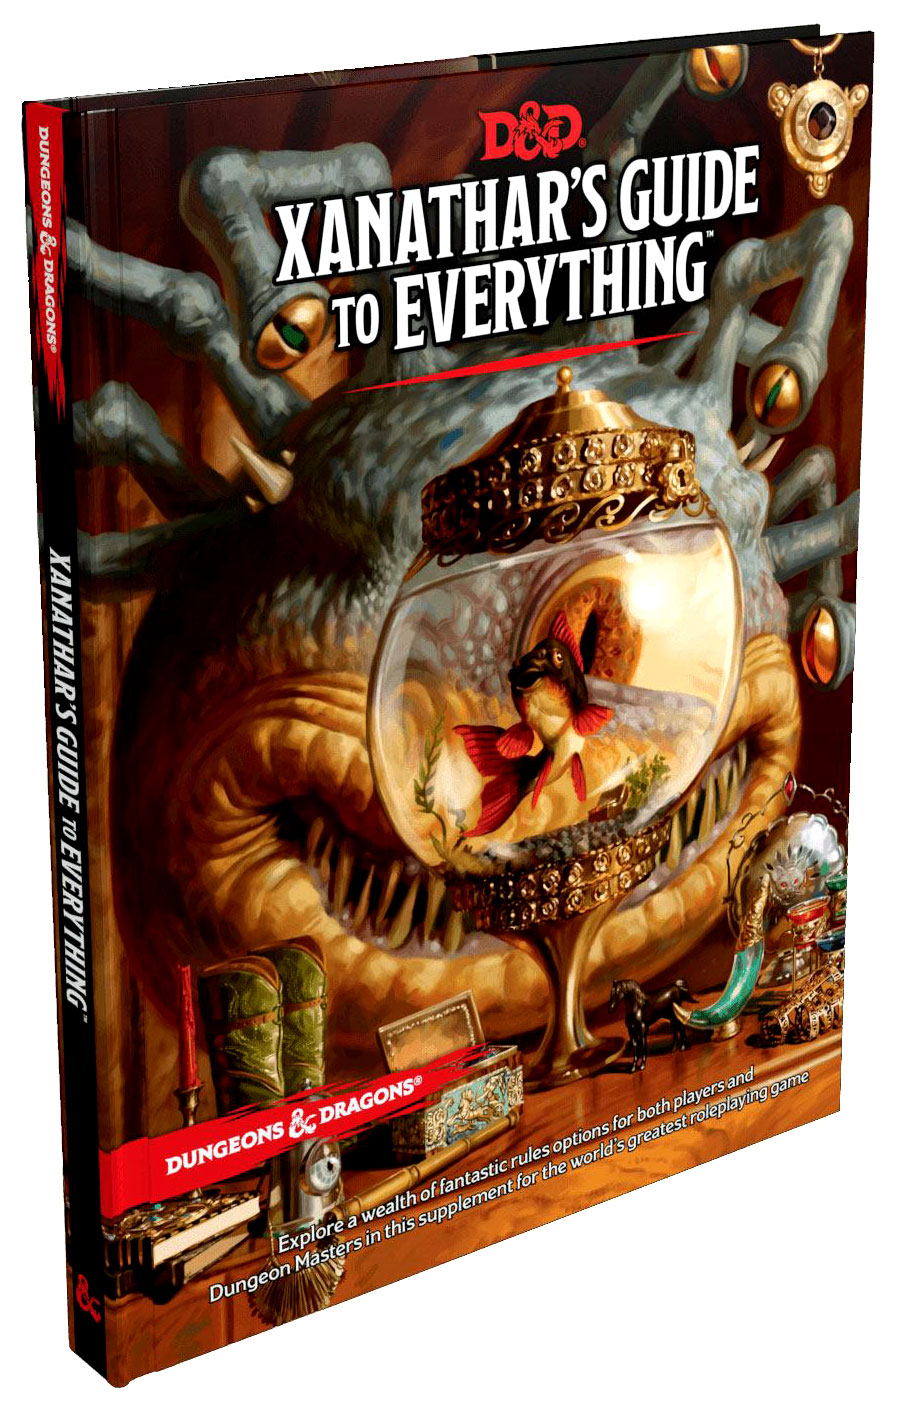 D&D Xanathar's Guide to Everything Hardcover RPG Book